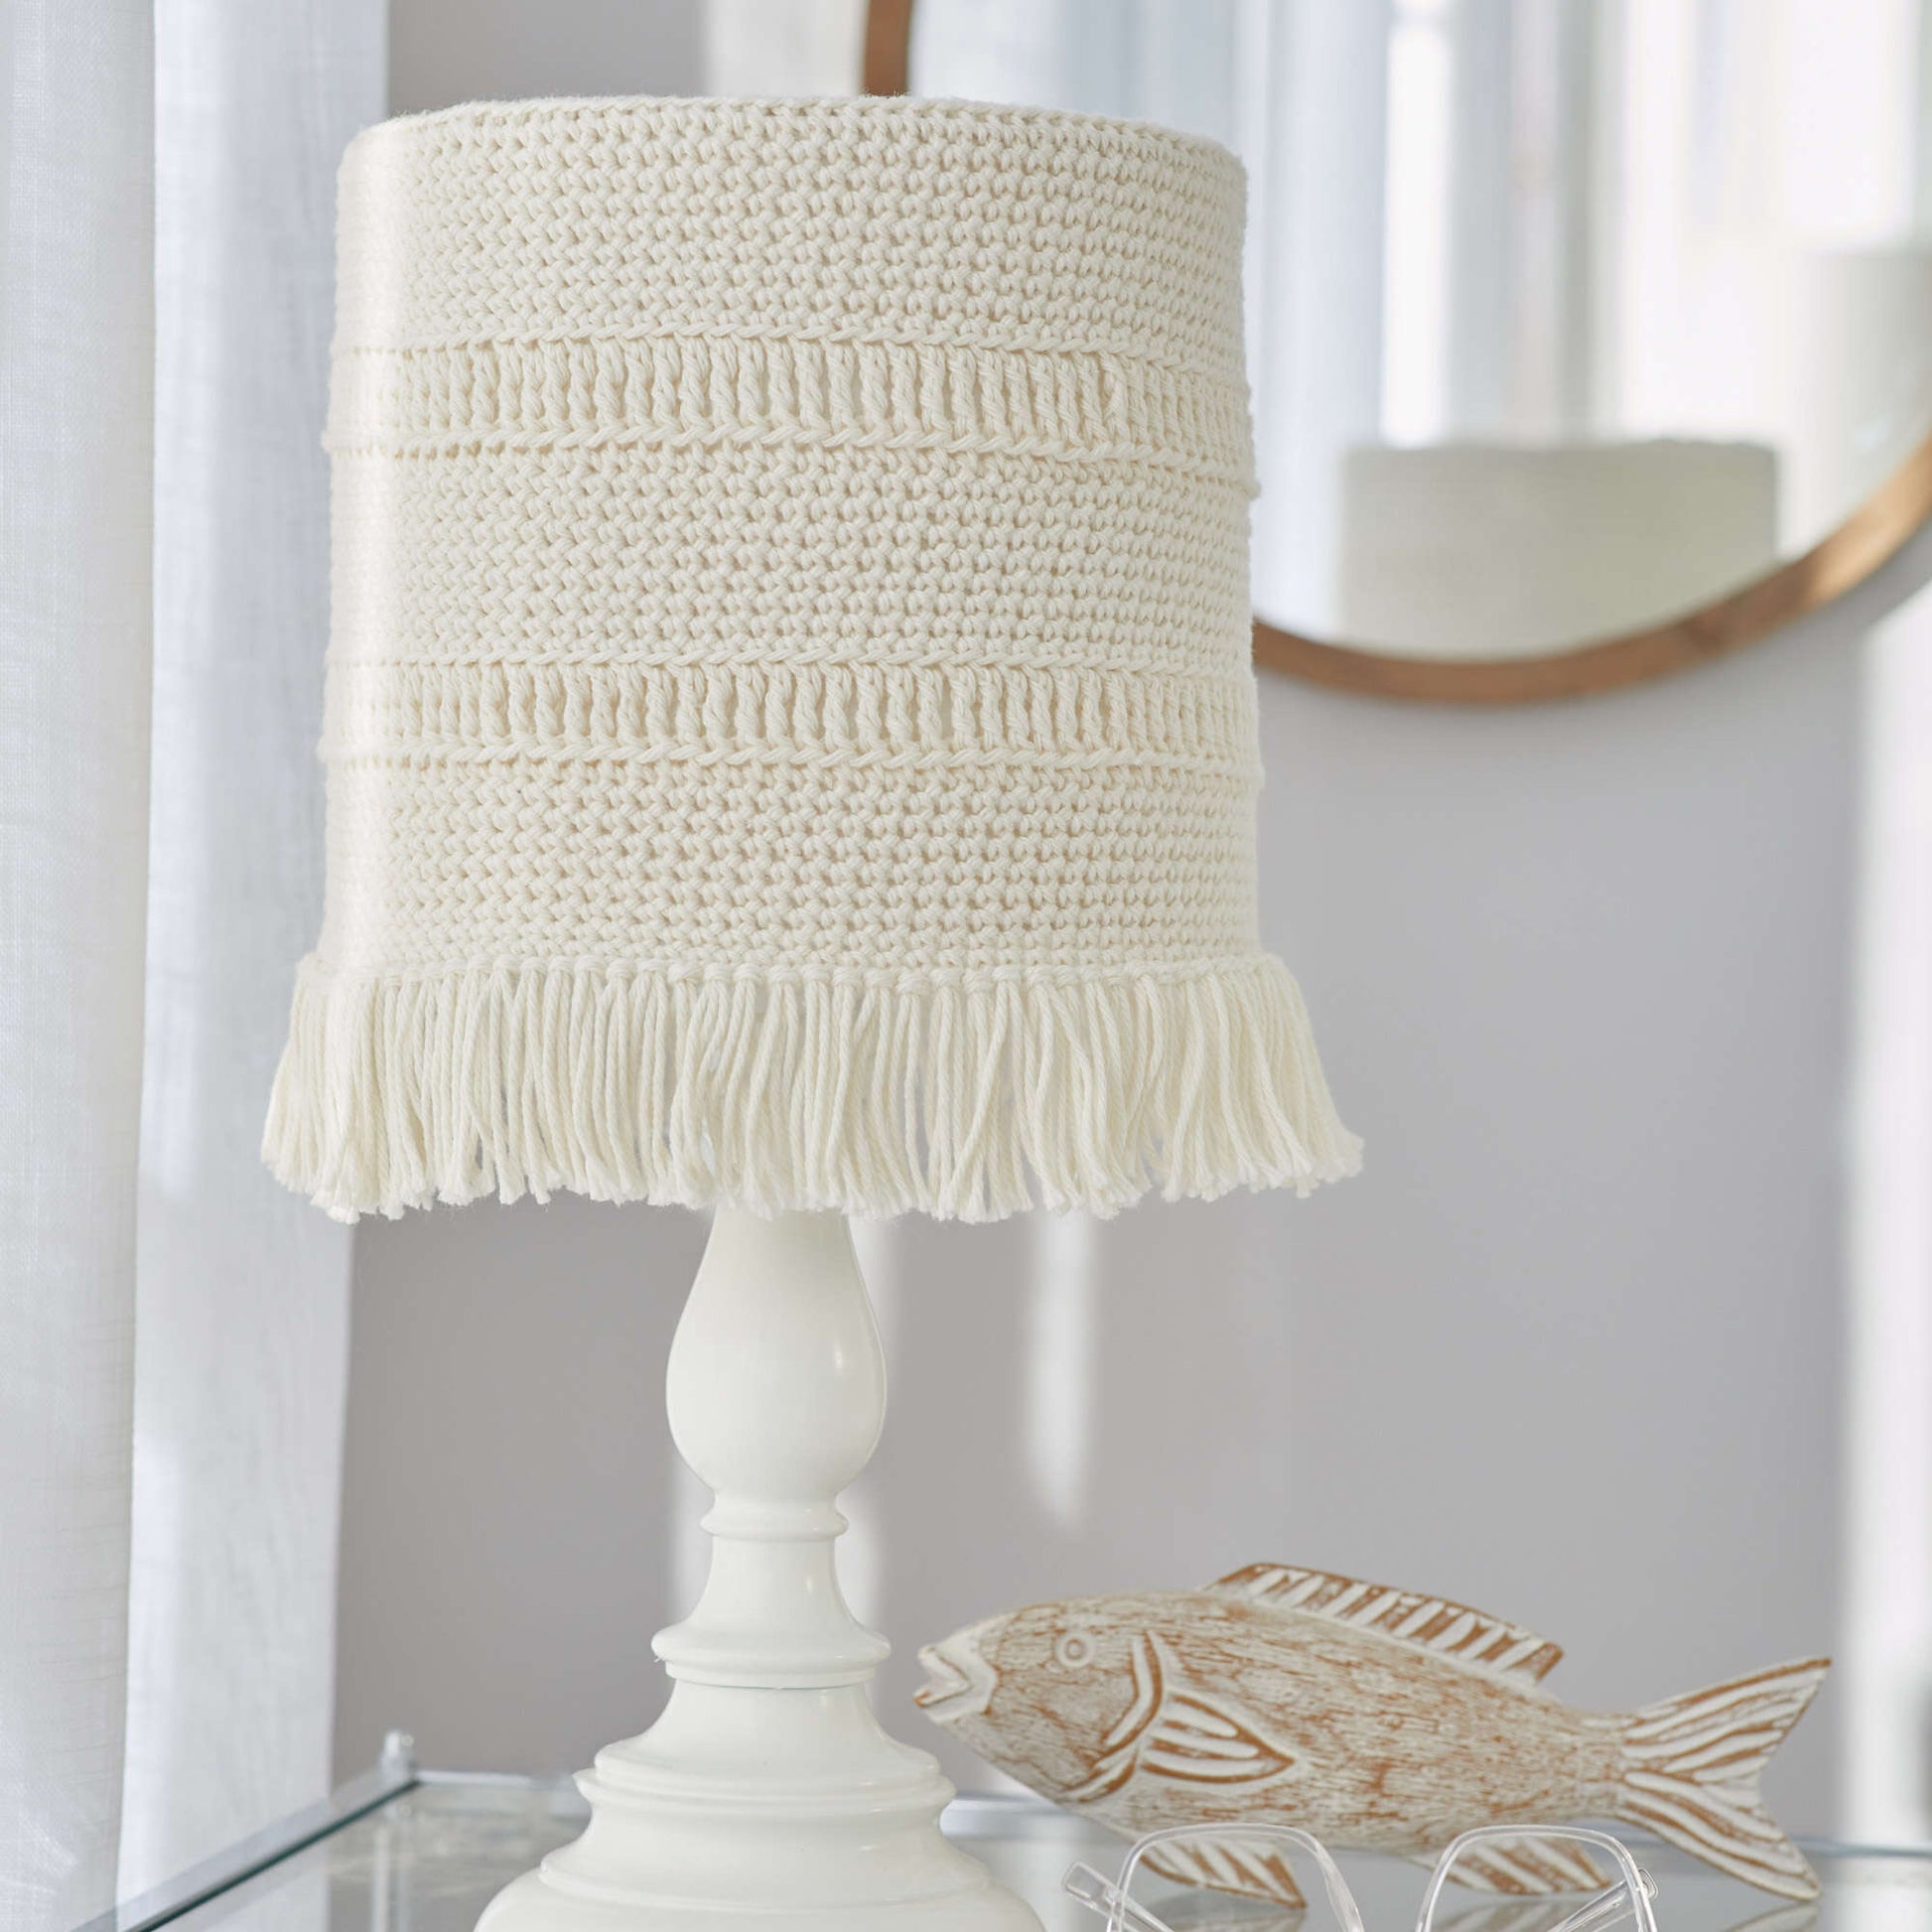 Free Red Heart Coastline Lampshade Cover Crochet Pattern